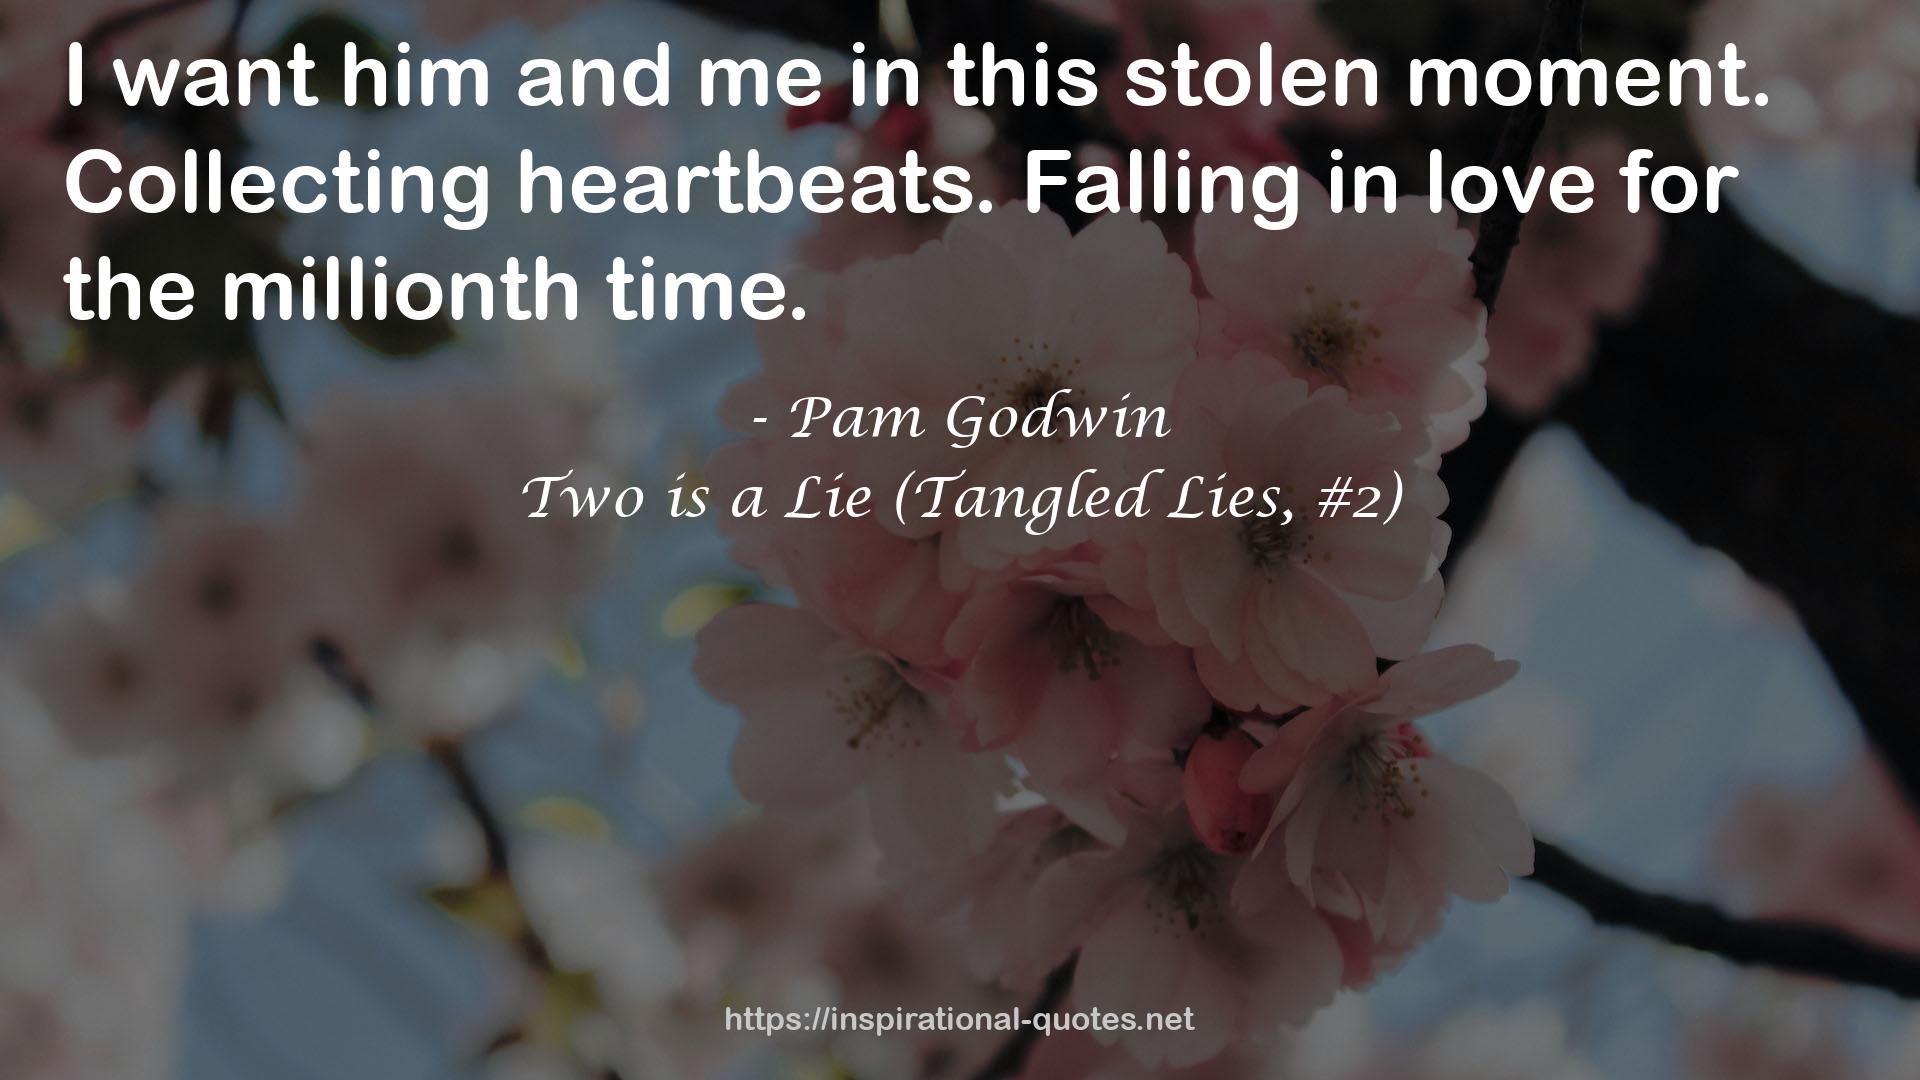 Two is a Lie (Tangled Lies, #2) QUOTES